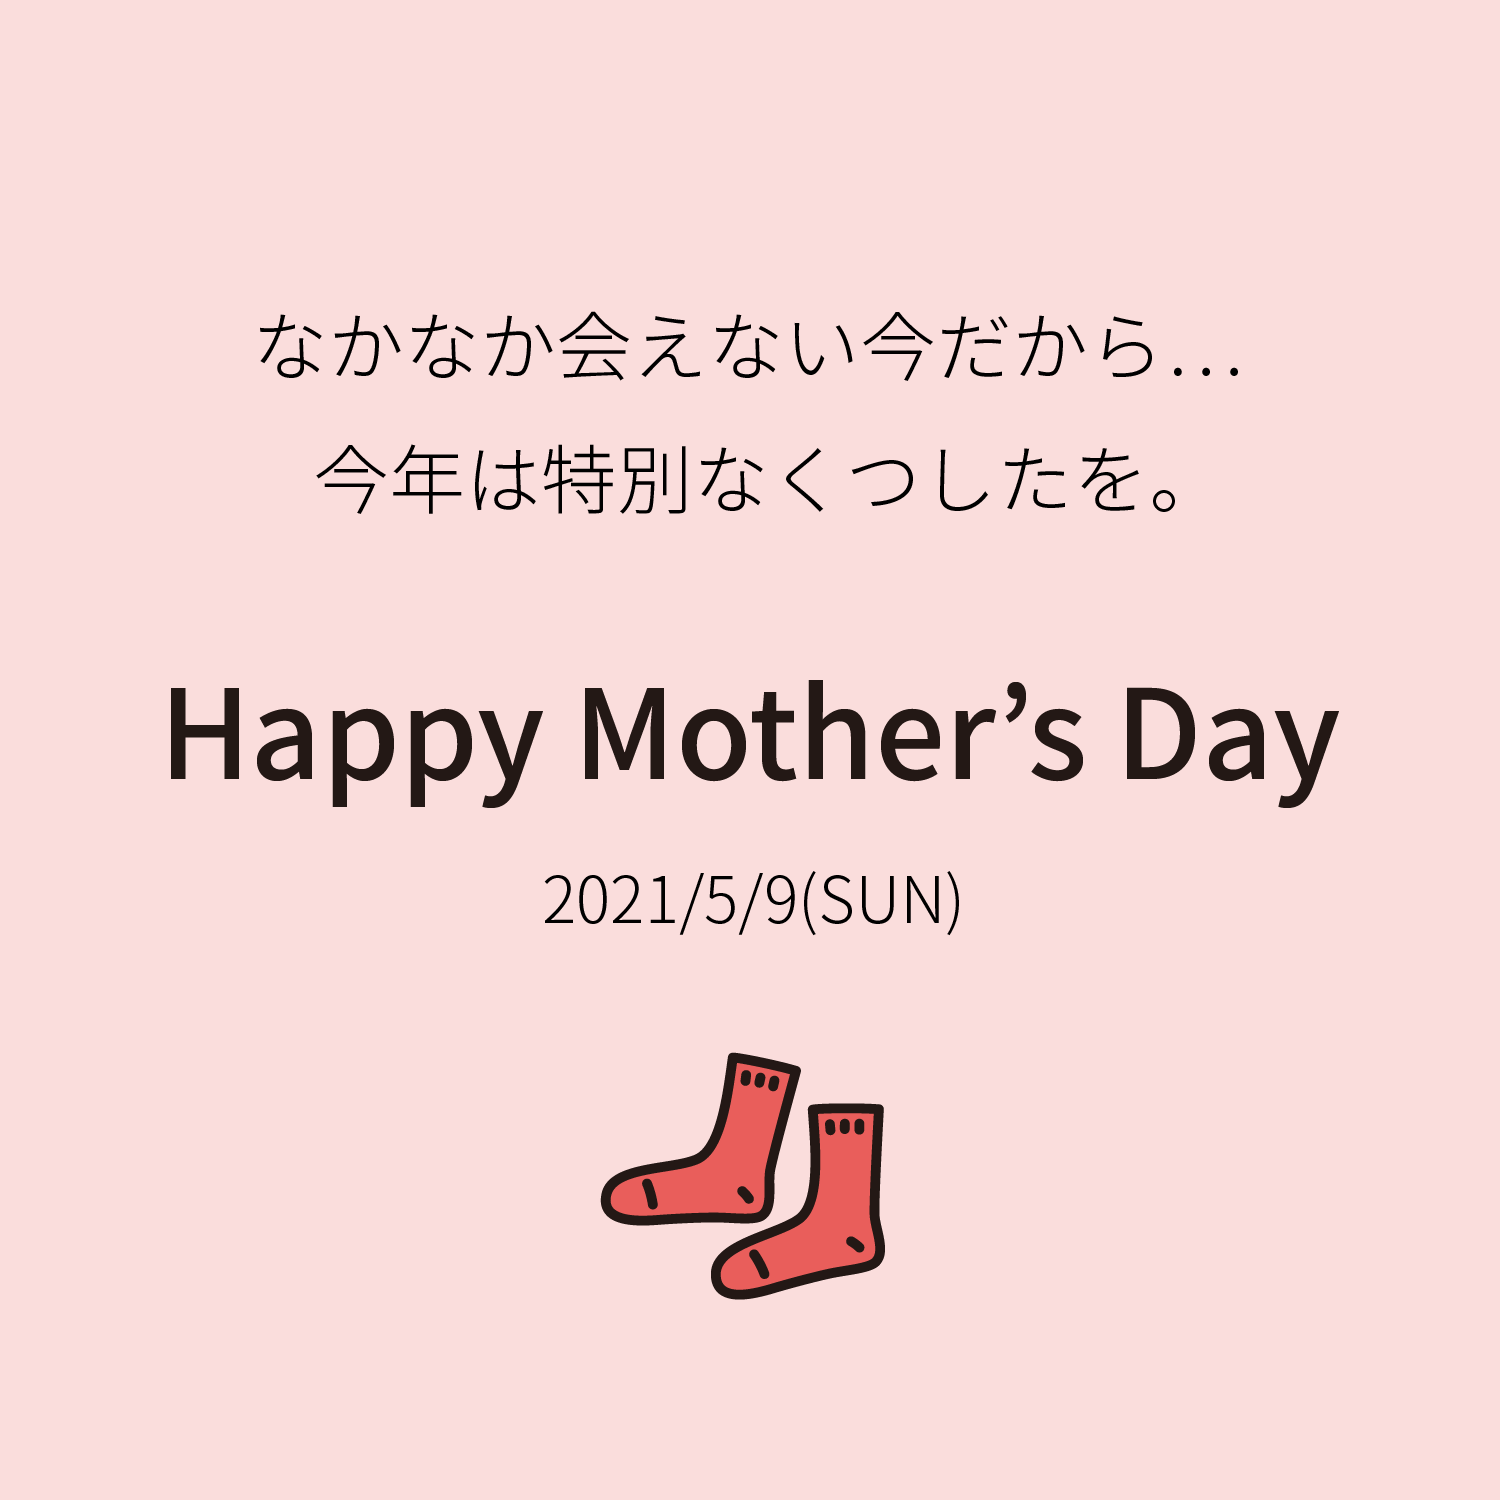 210416_20210509mothersday.png